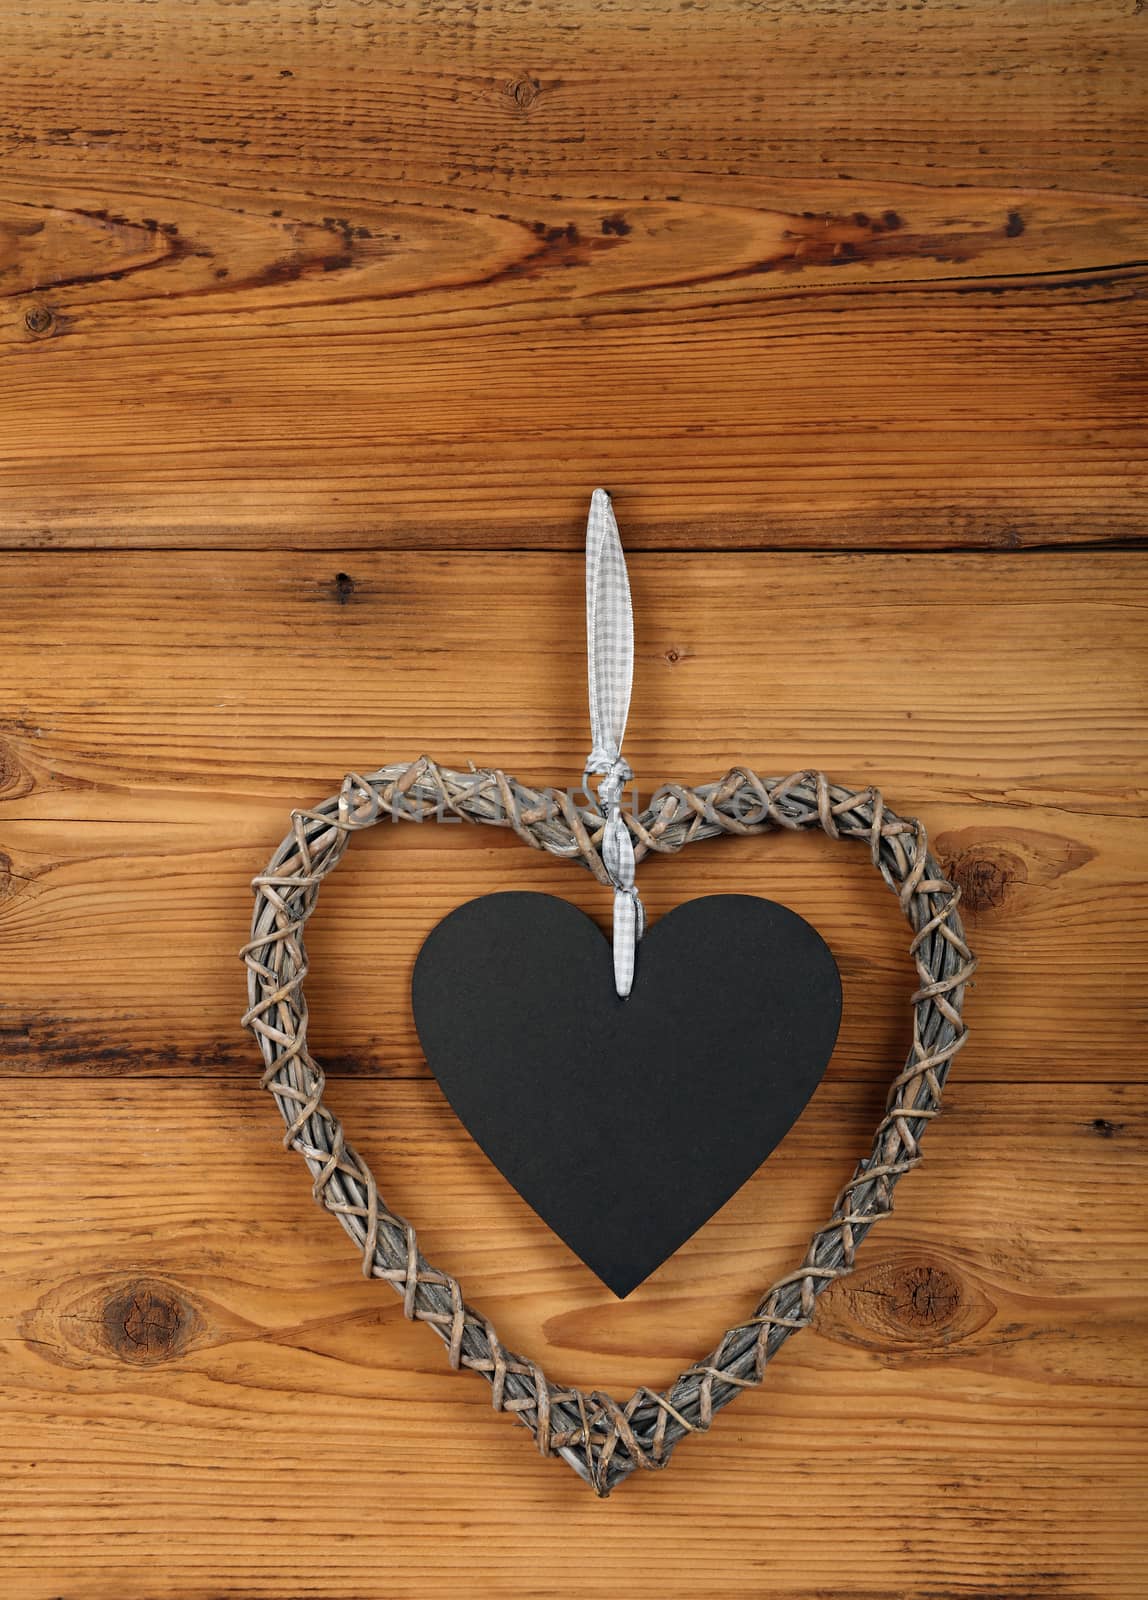 Heart shaped handmade wicker braided frame with chalk blackboard copy space on old vintage rustic brown wooden wall, close up